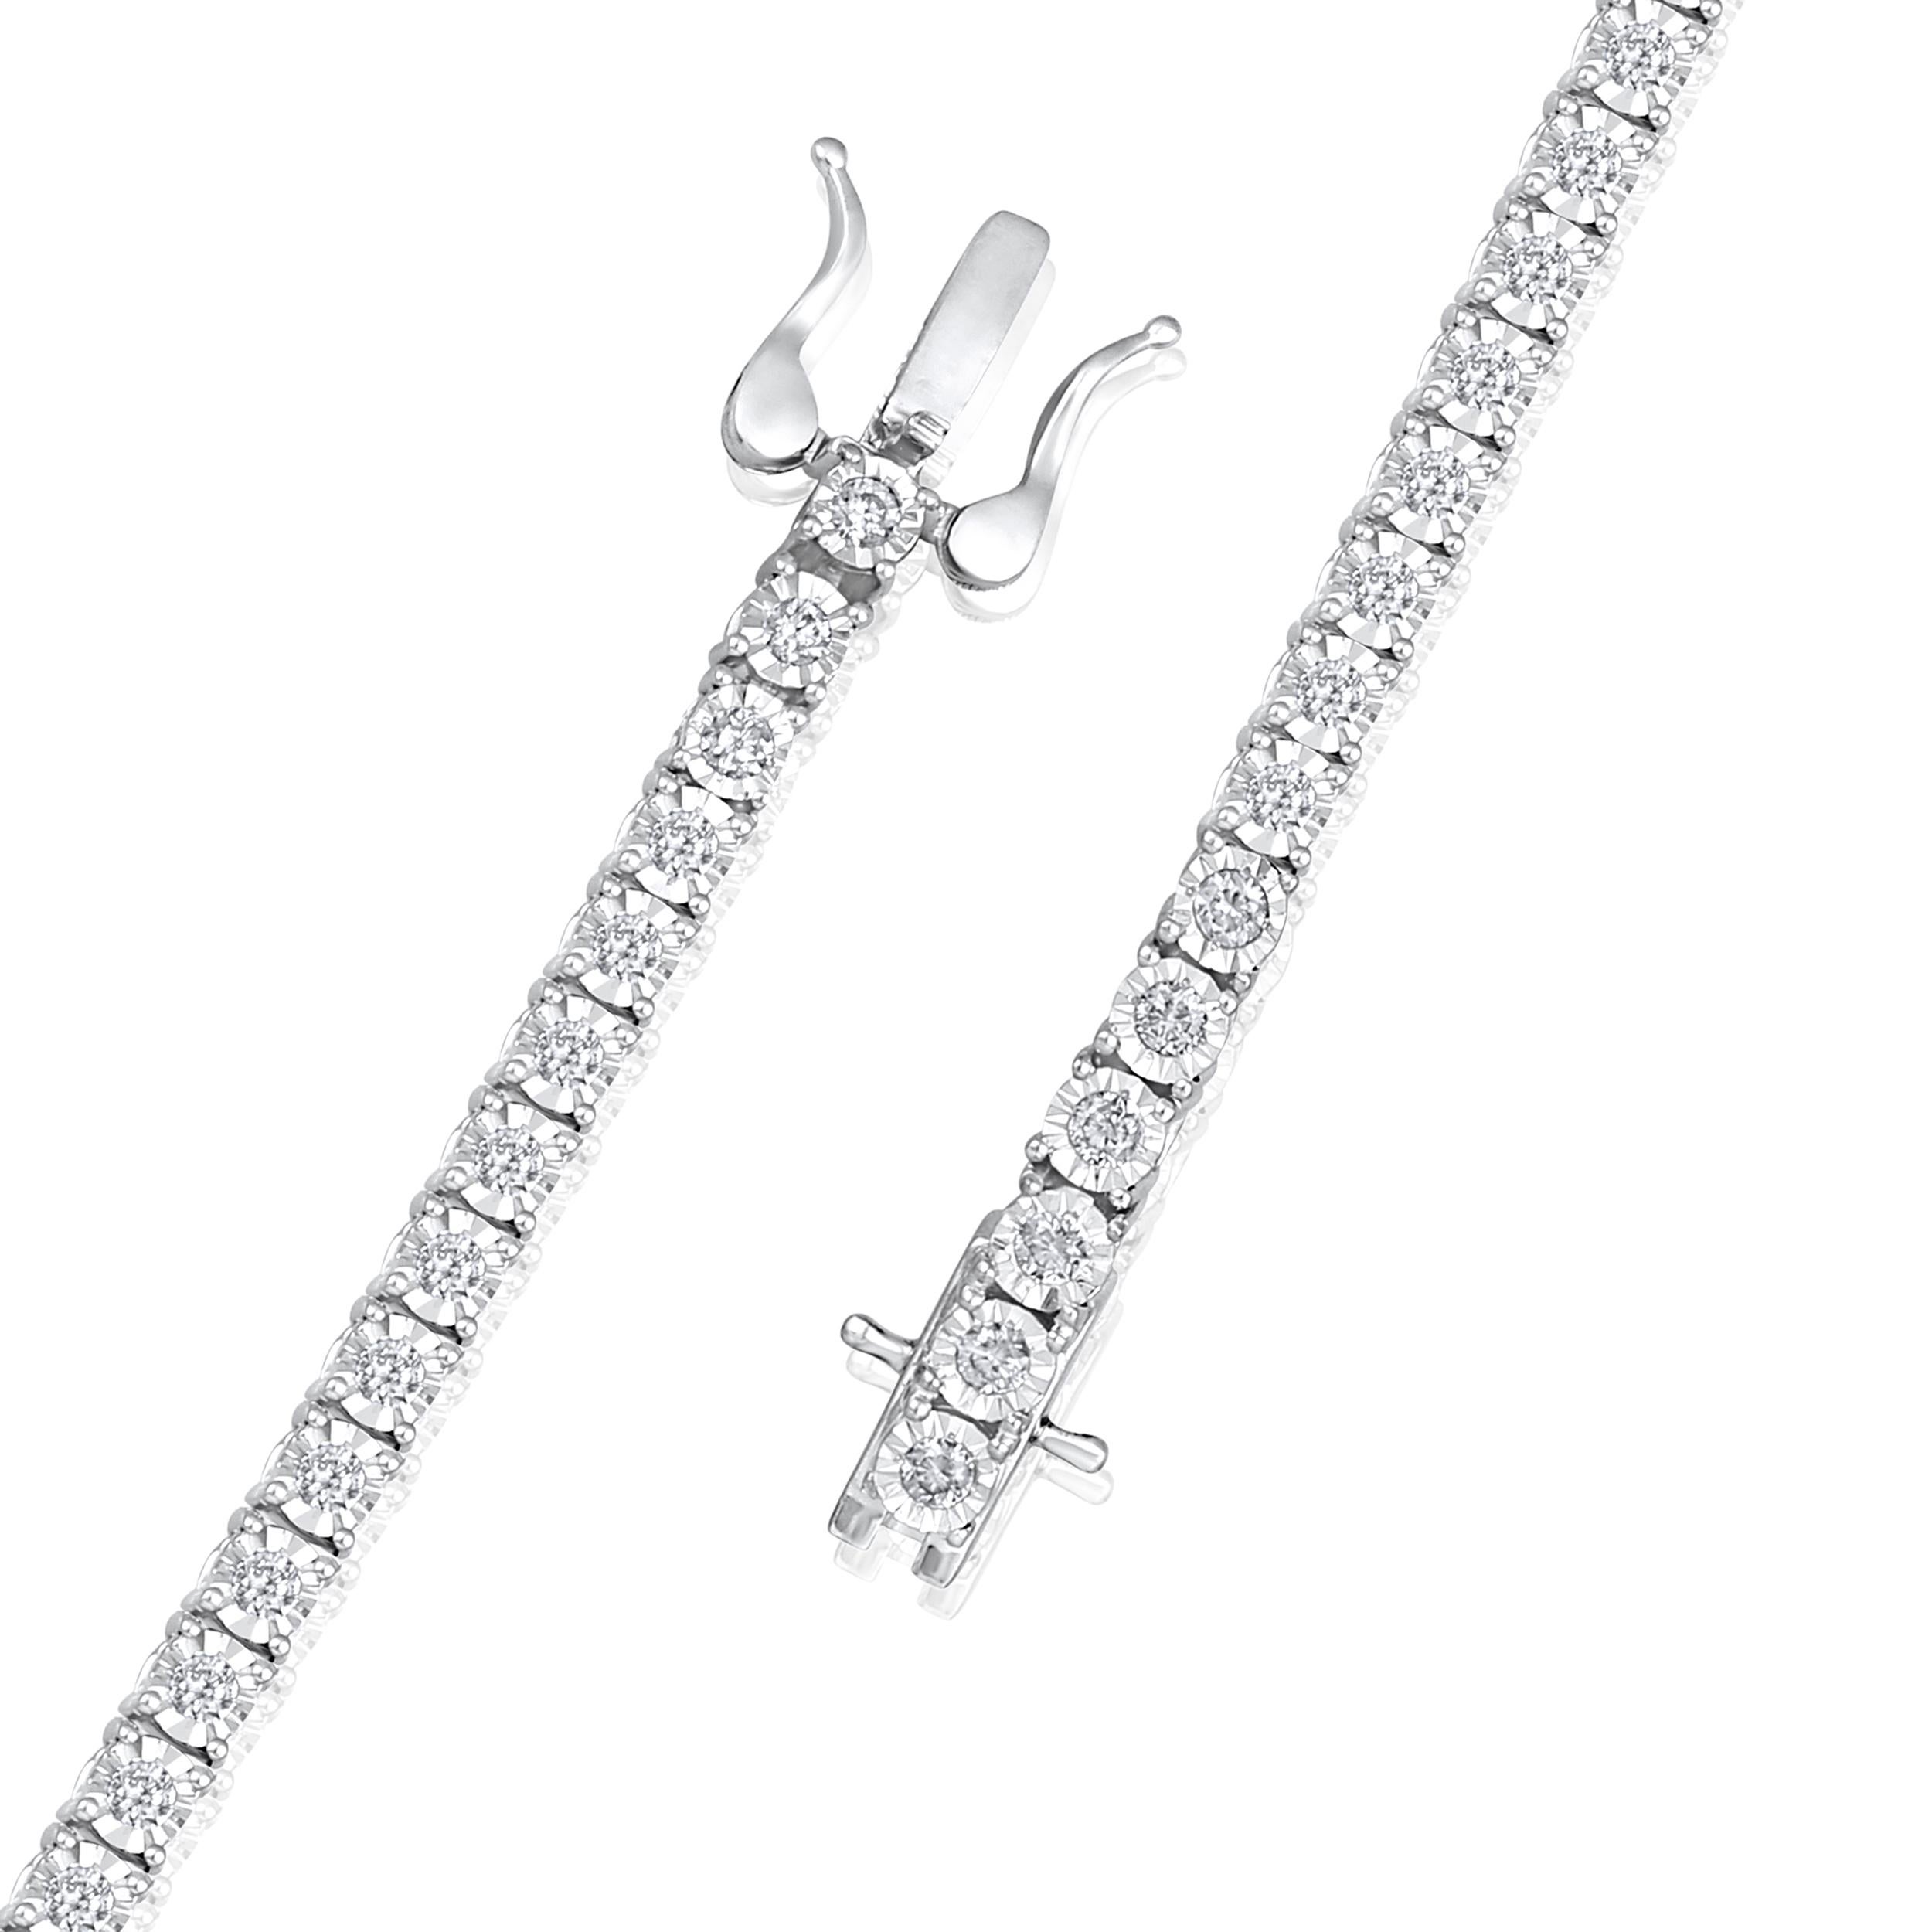 Crafted in 14.09 grams of 14K White Gold, the bracelet contains 54 stones of Round Diamonds with a total of 1.33 carat in F-G color and I1-I2 carat. The bracelet length is 7 inches.

This jewelry piece will be expertly crafted by our skilled